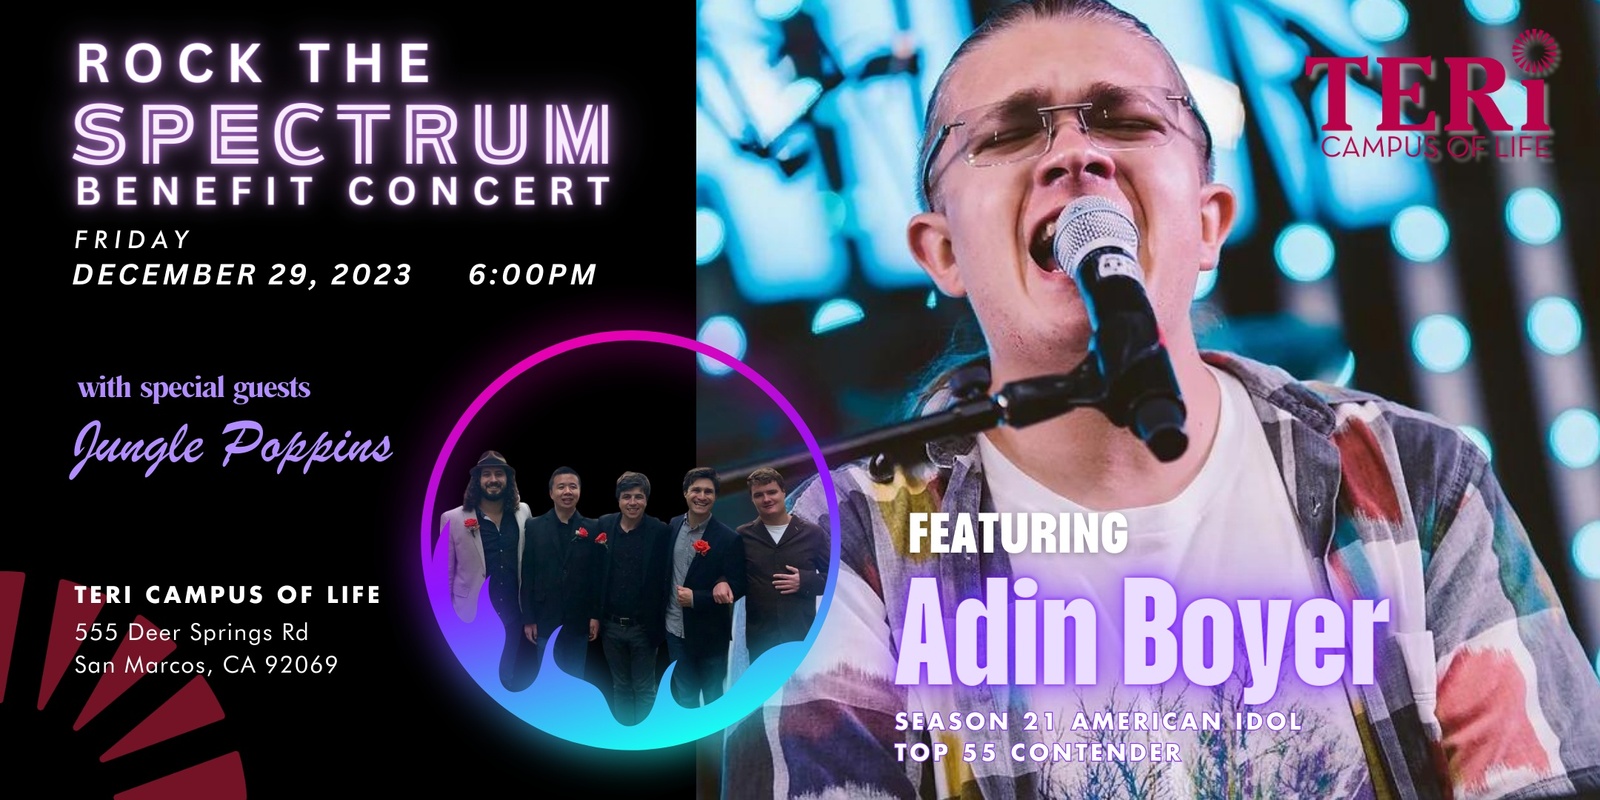 Banner image for ROCK THE SPECTRUM BENEFIT CONCERT: American Idol Contestant Adin Boyer &  Jungle Poppins